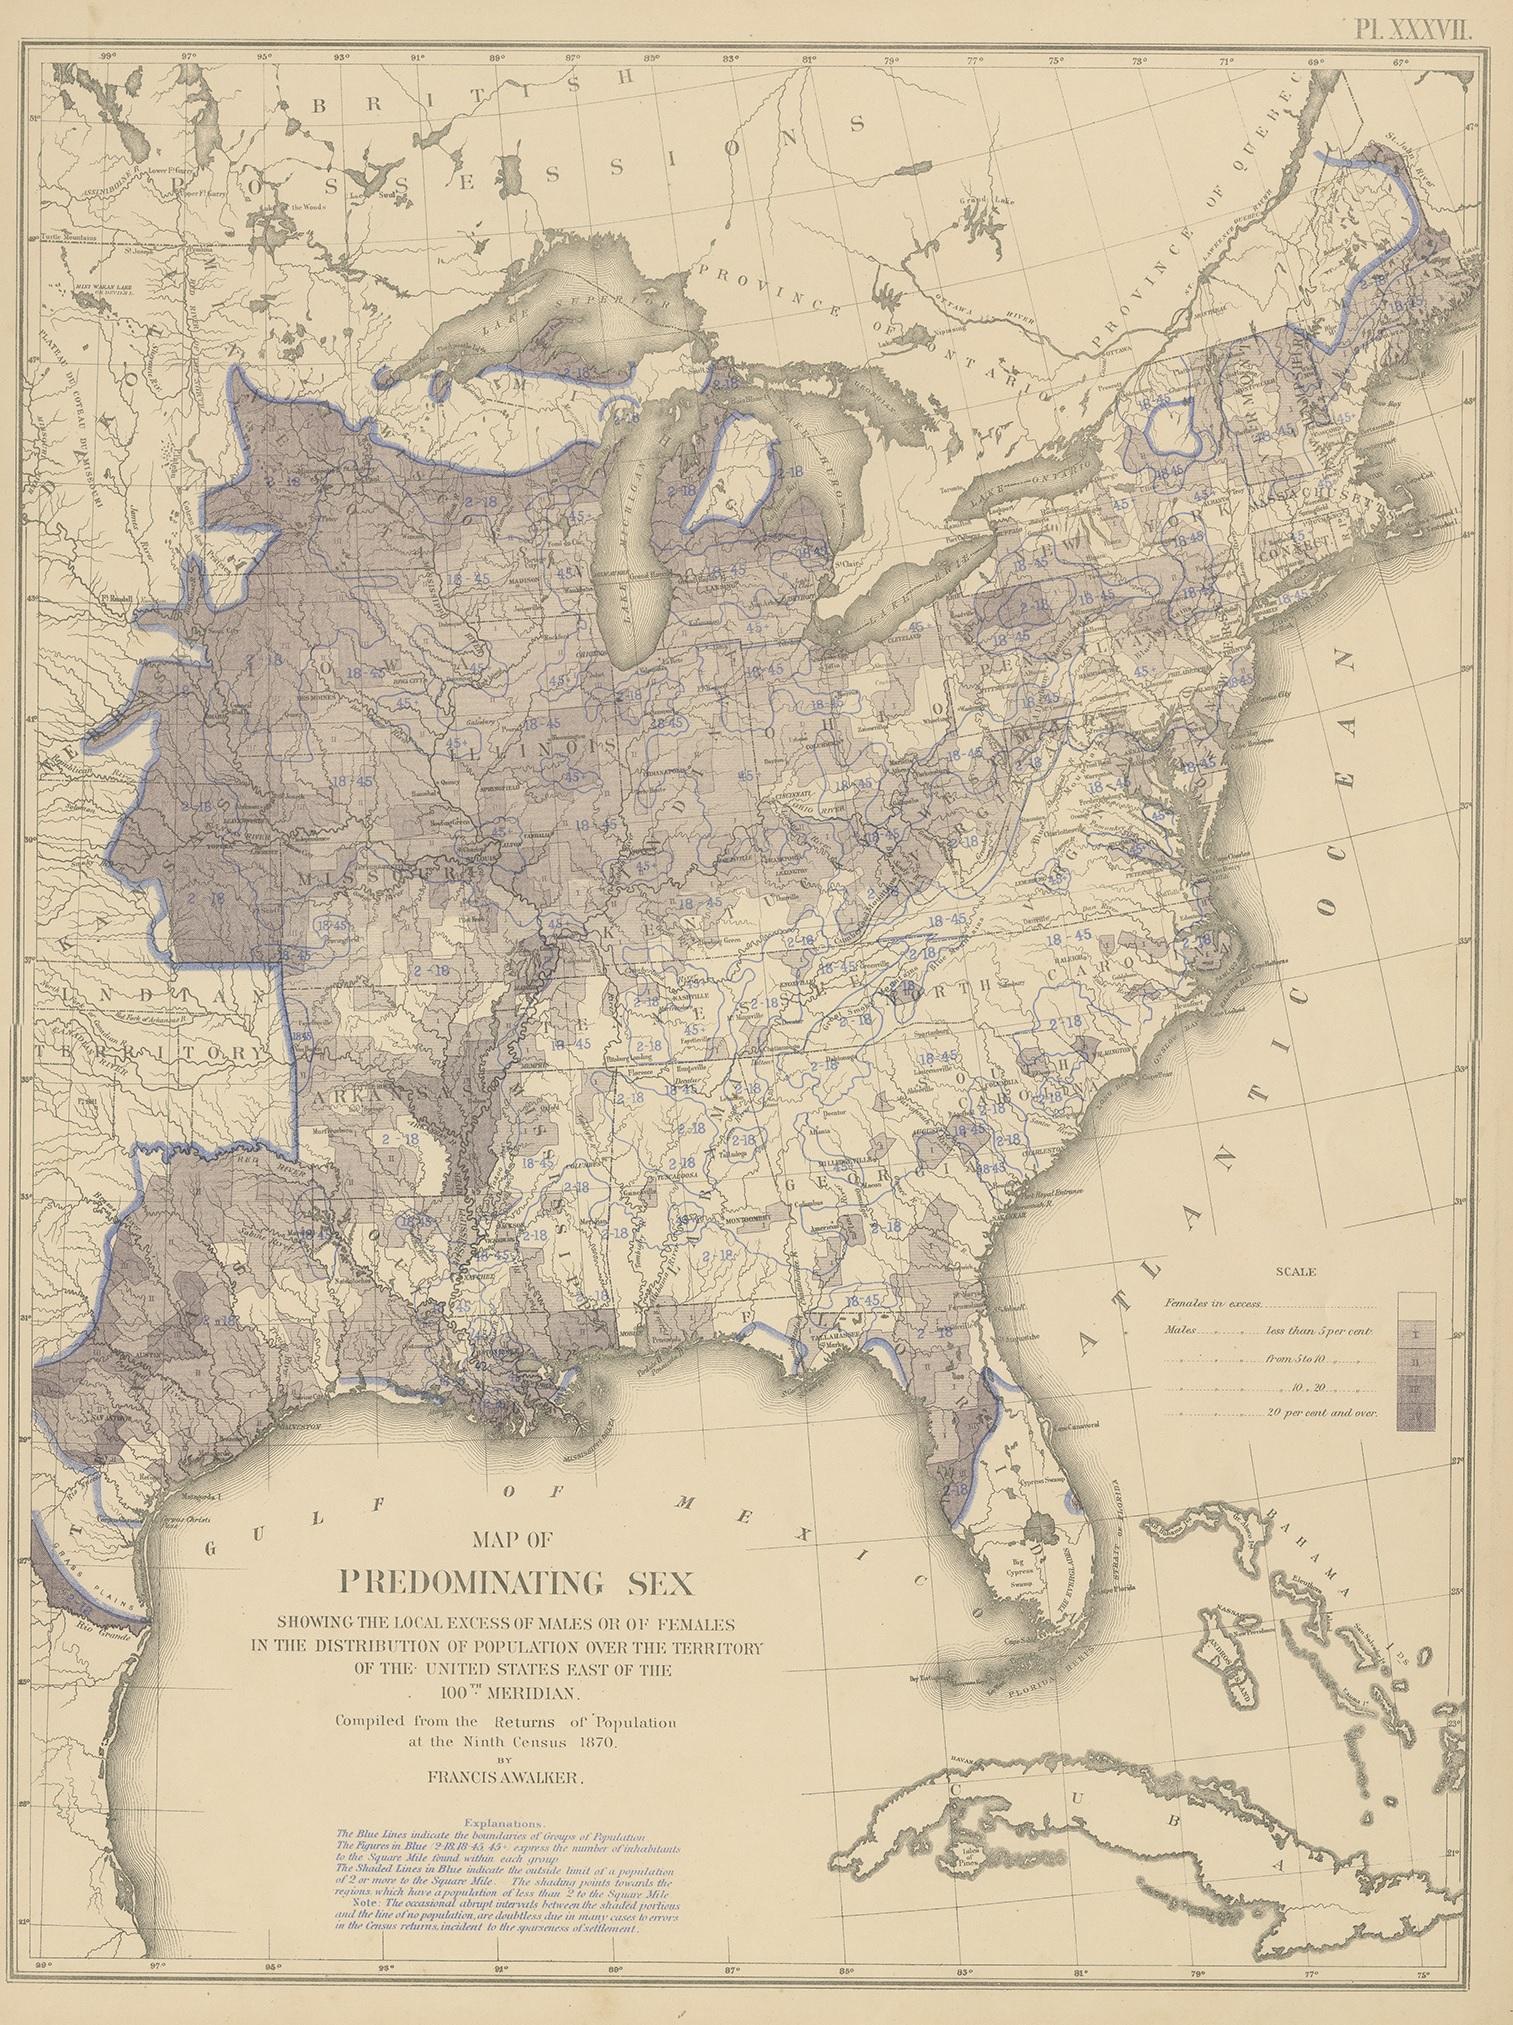 Antique chart titled 'Map of predominating sex showing the local excess of males or of females in the distribution of population over the territory of the United States east of the 100th Meridian. Compiled from the statistics of population at the